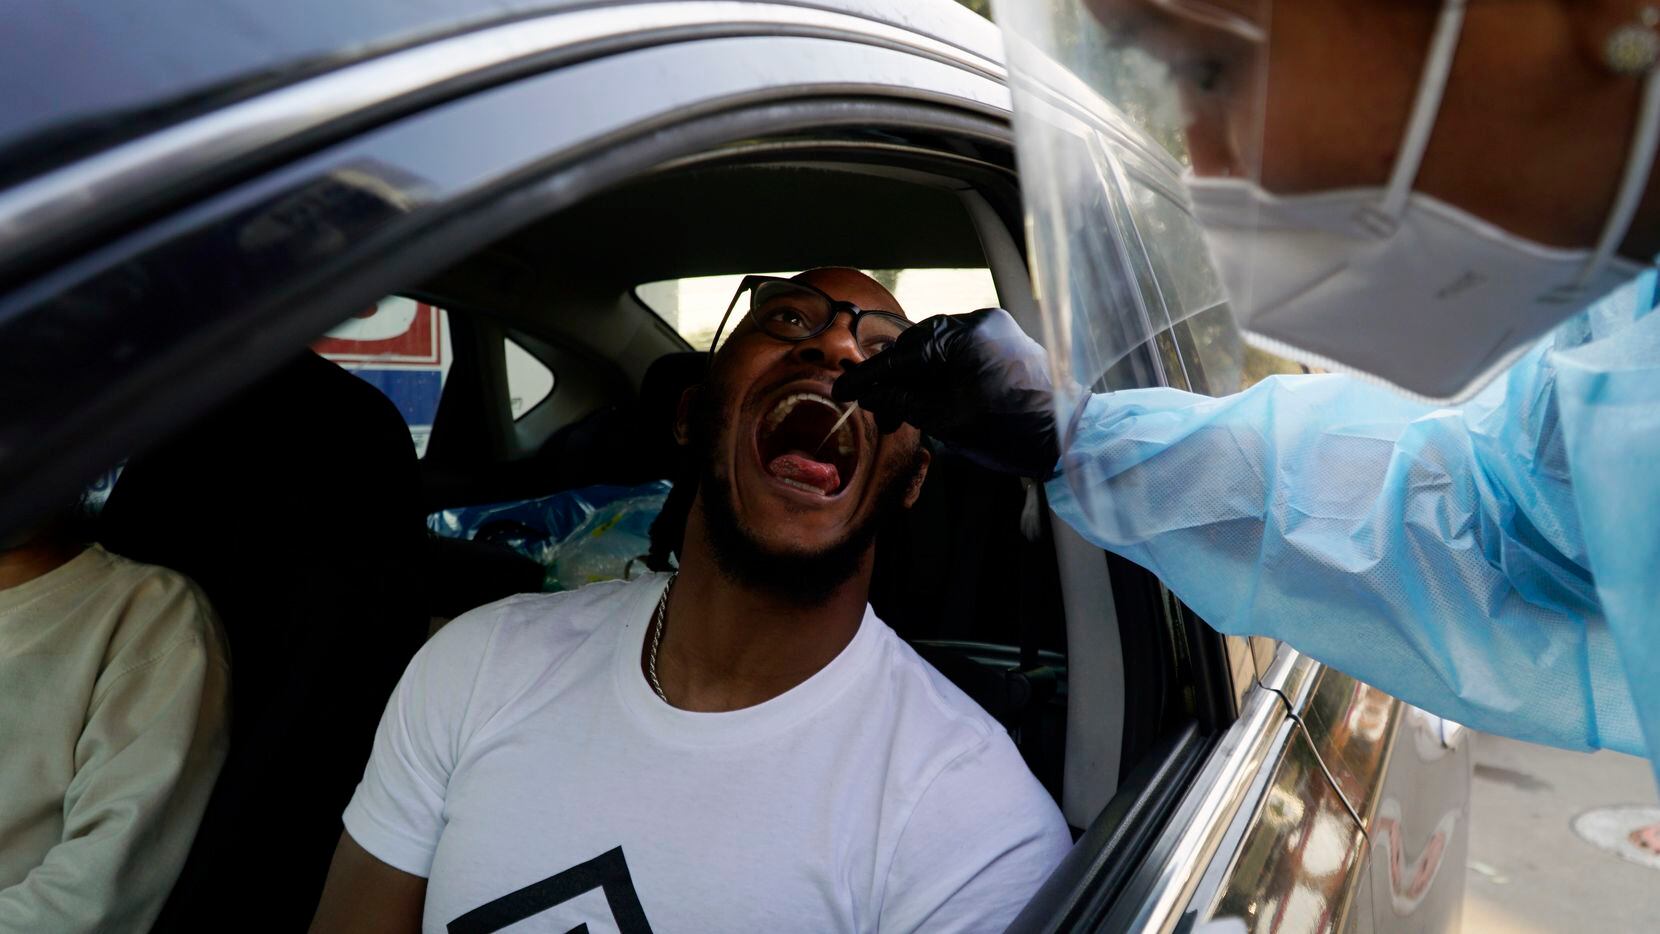 Antoine Howard gets a Covid test "Go Get Tested" location at a Shell station in Arlington,...